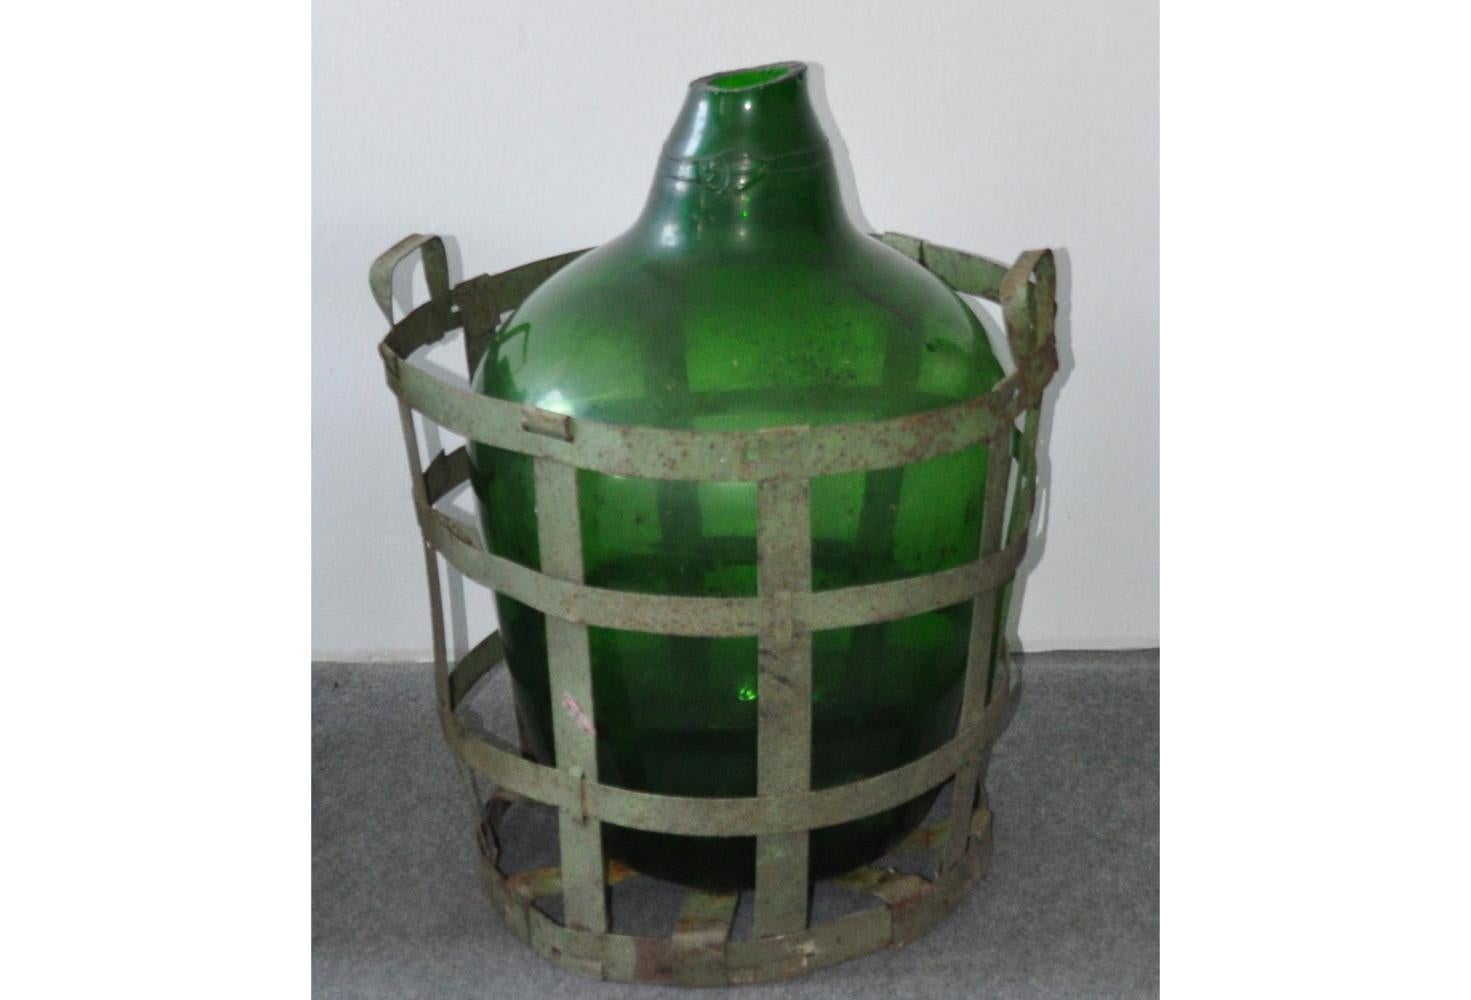 This authentic antique bottle was hand blown green glass and sits within a weathered iron basket.
Iron basket with demijohn wine bottle.

Available:4 st


Dimensions: 27.56 in
Diameter 21.26 in.
 